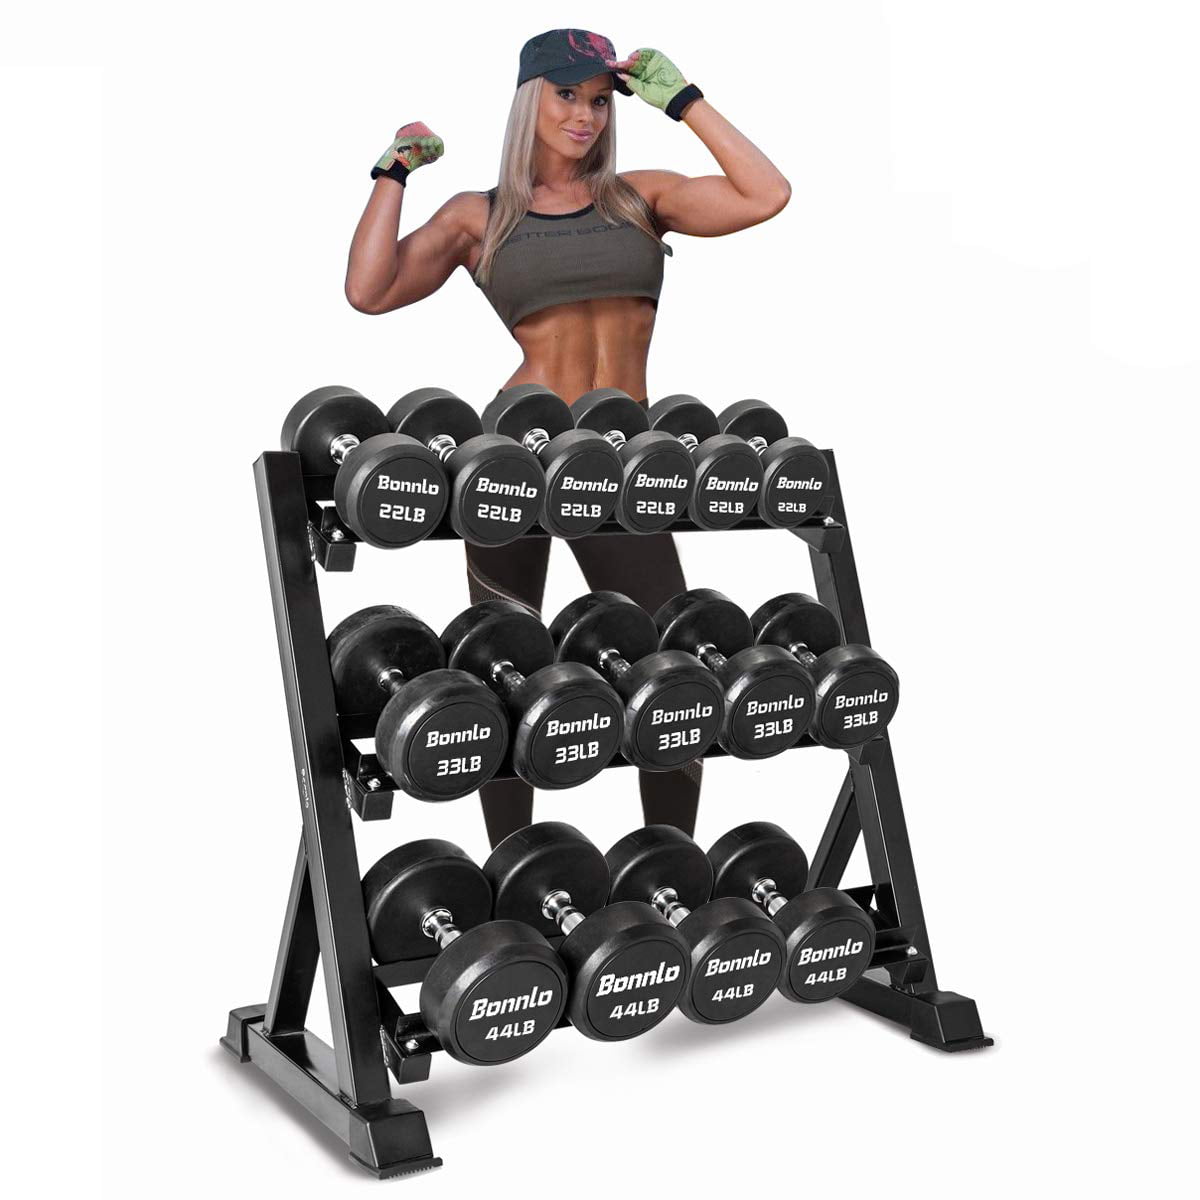 3 Tier Heavy Duty Gym Dumbbell Rack Stand Holder For Dumbbells 660-pound Max 